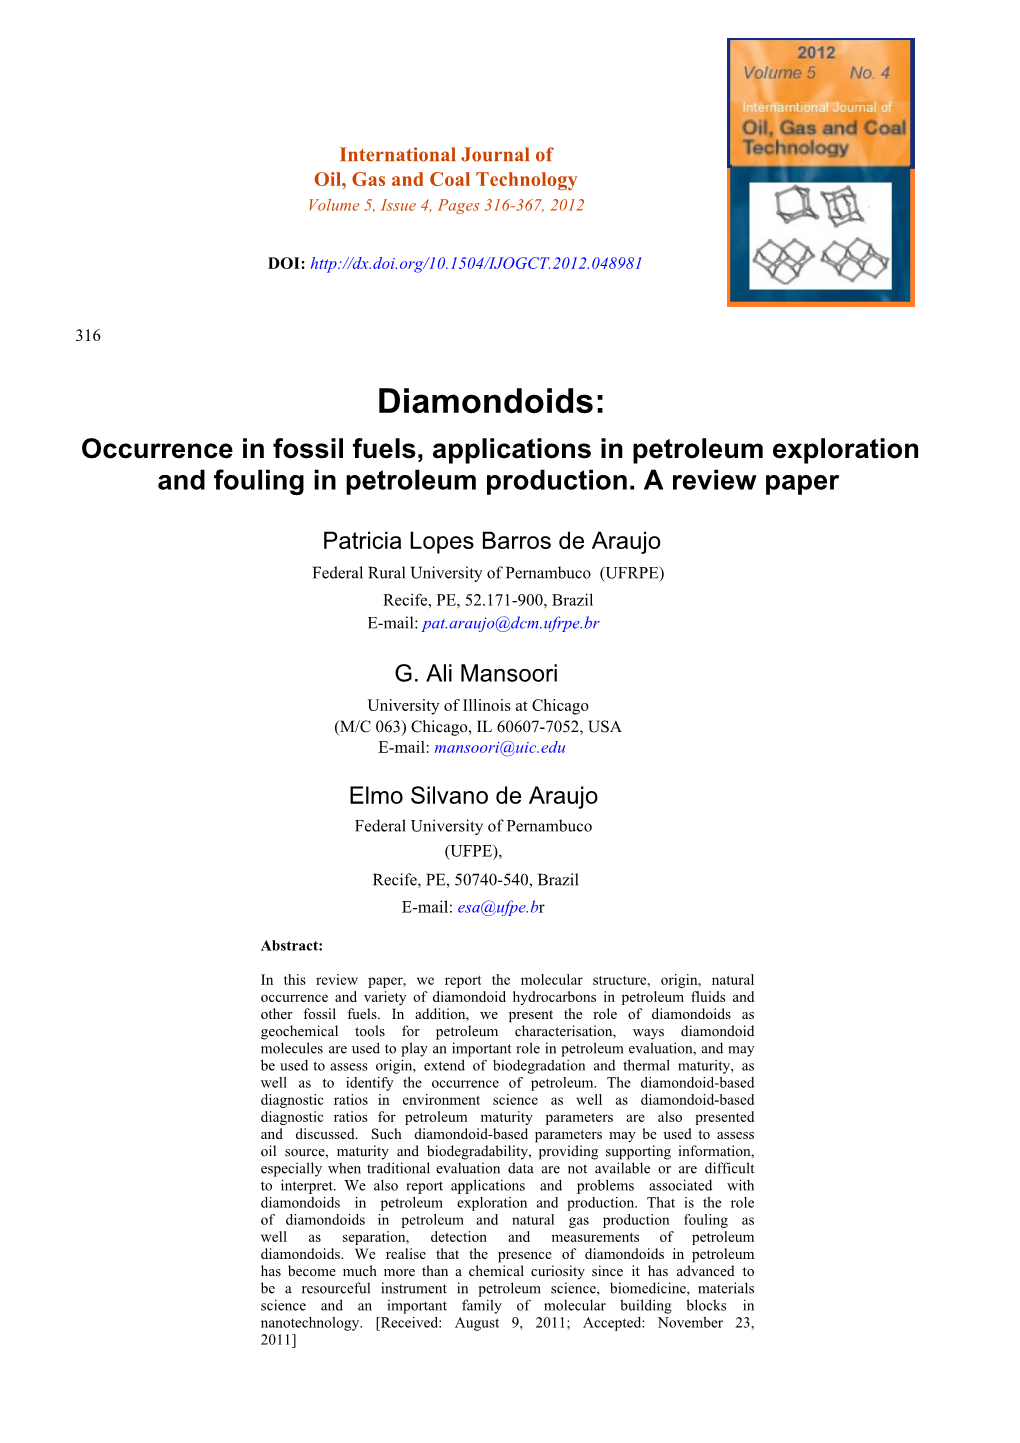 Diamondoids: Occurrence in Fossil Fuels, Applications in Petroleum Exploration and Fouling in Petroleum Production